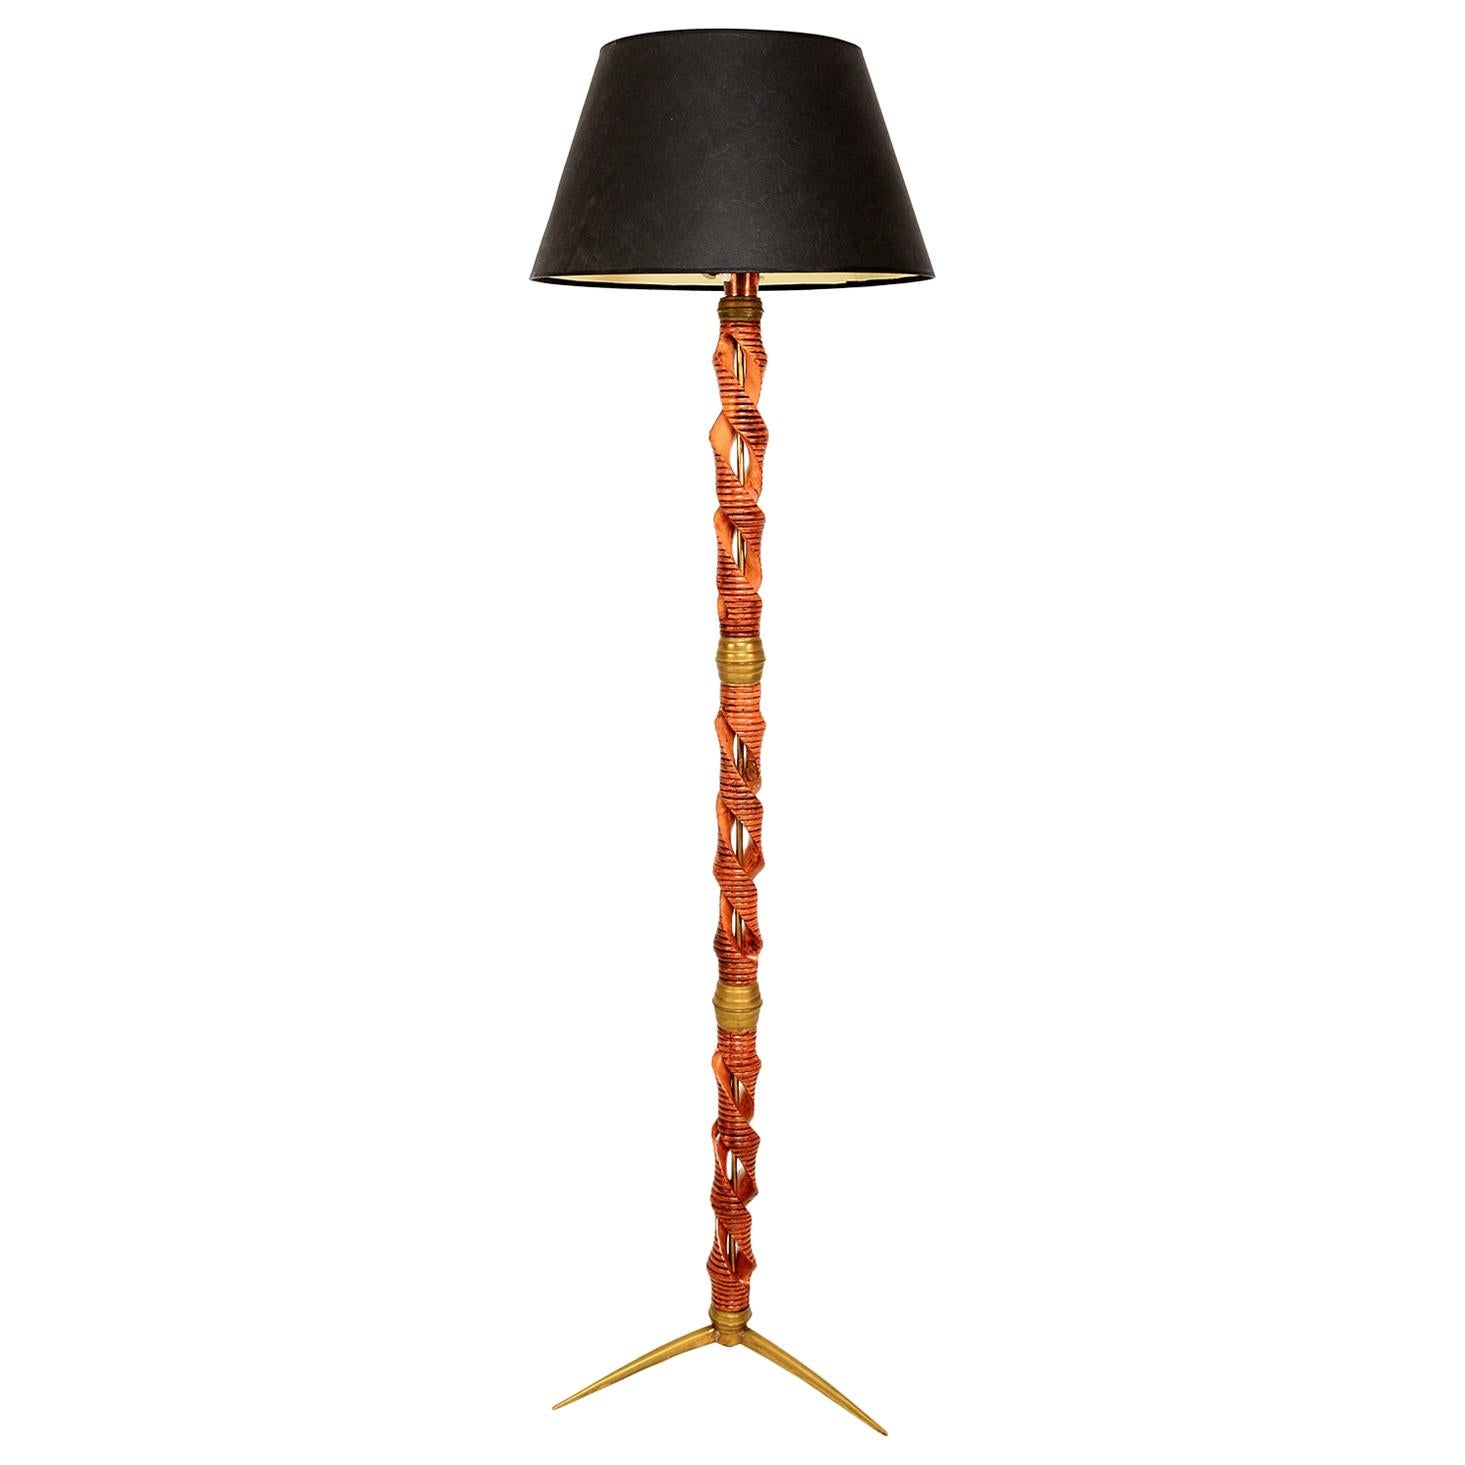 Style of Franco Albini Italian Floor Lamp in Braided Blonde Wood with Brass